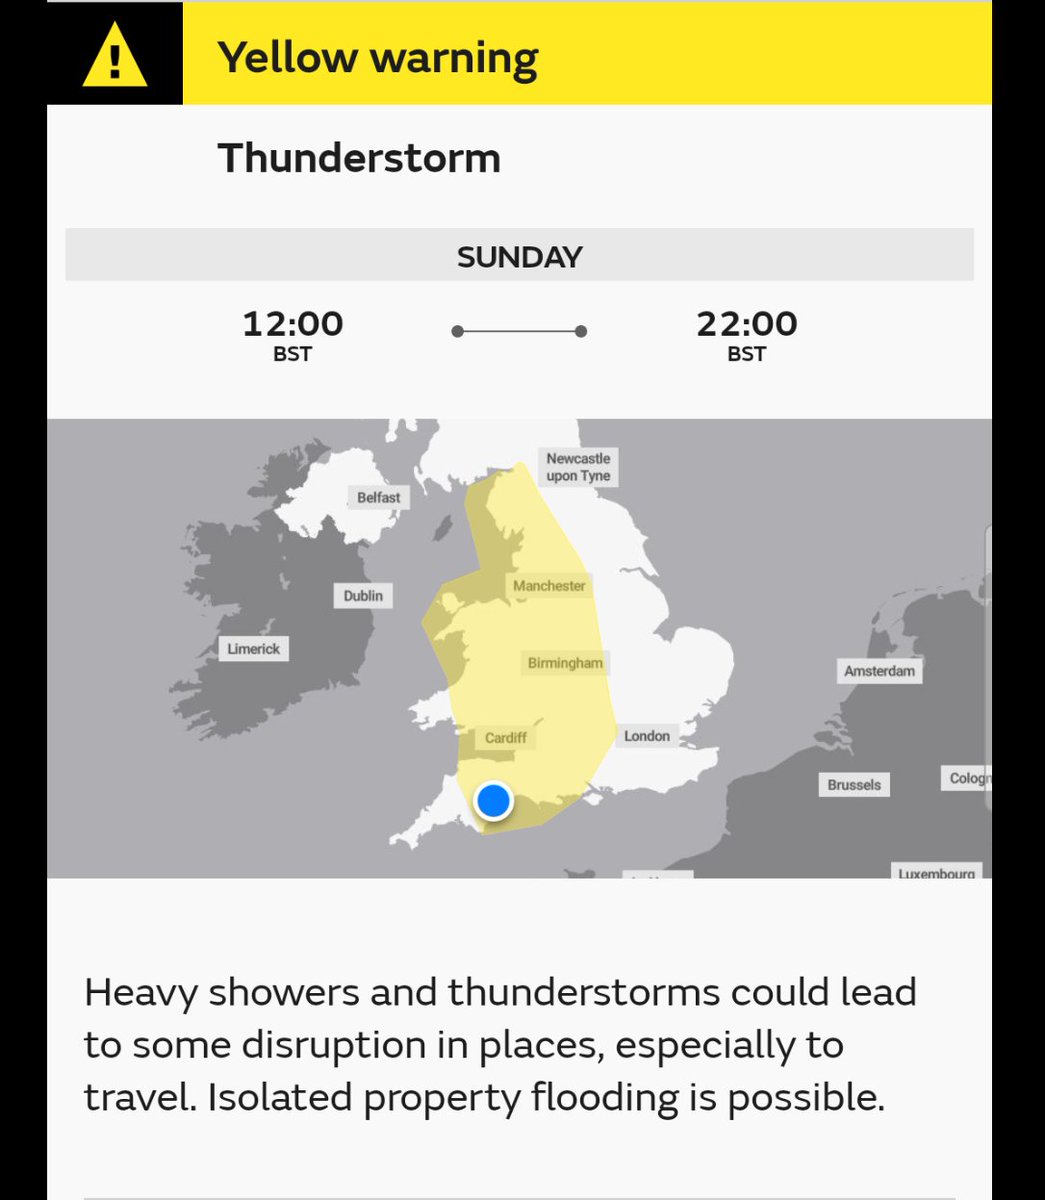 #Metoffice yellow warnings ⚠️ for #thunderstorms issued for Sunday 

#weatheraware